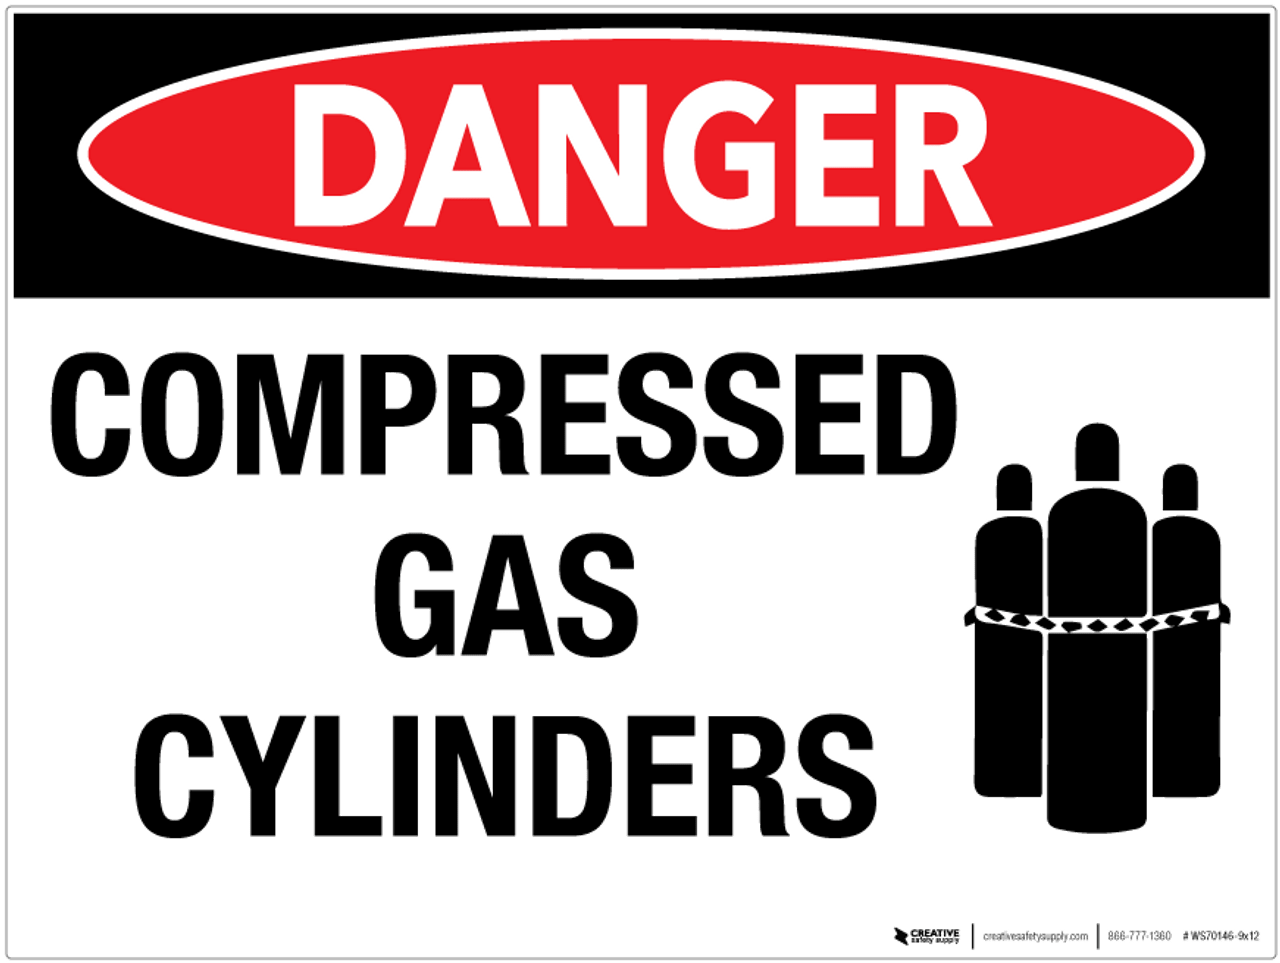 gas sign